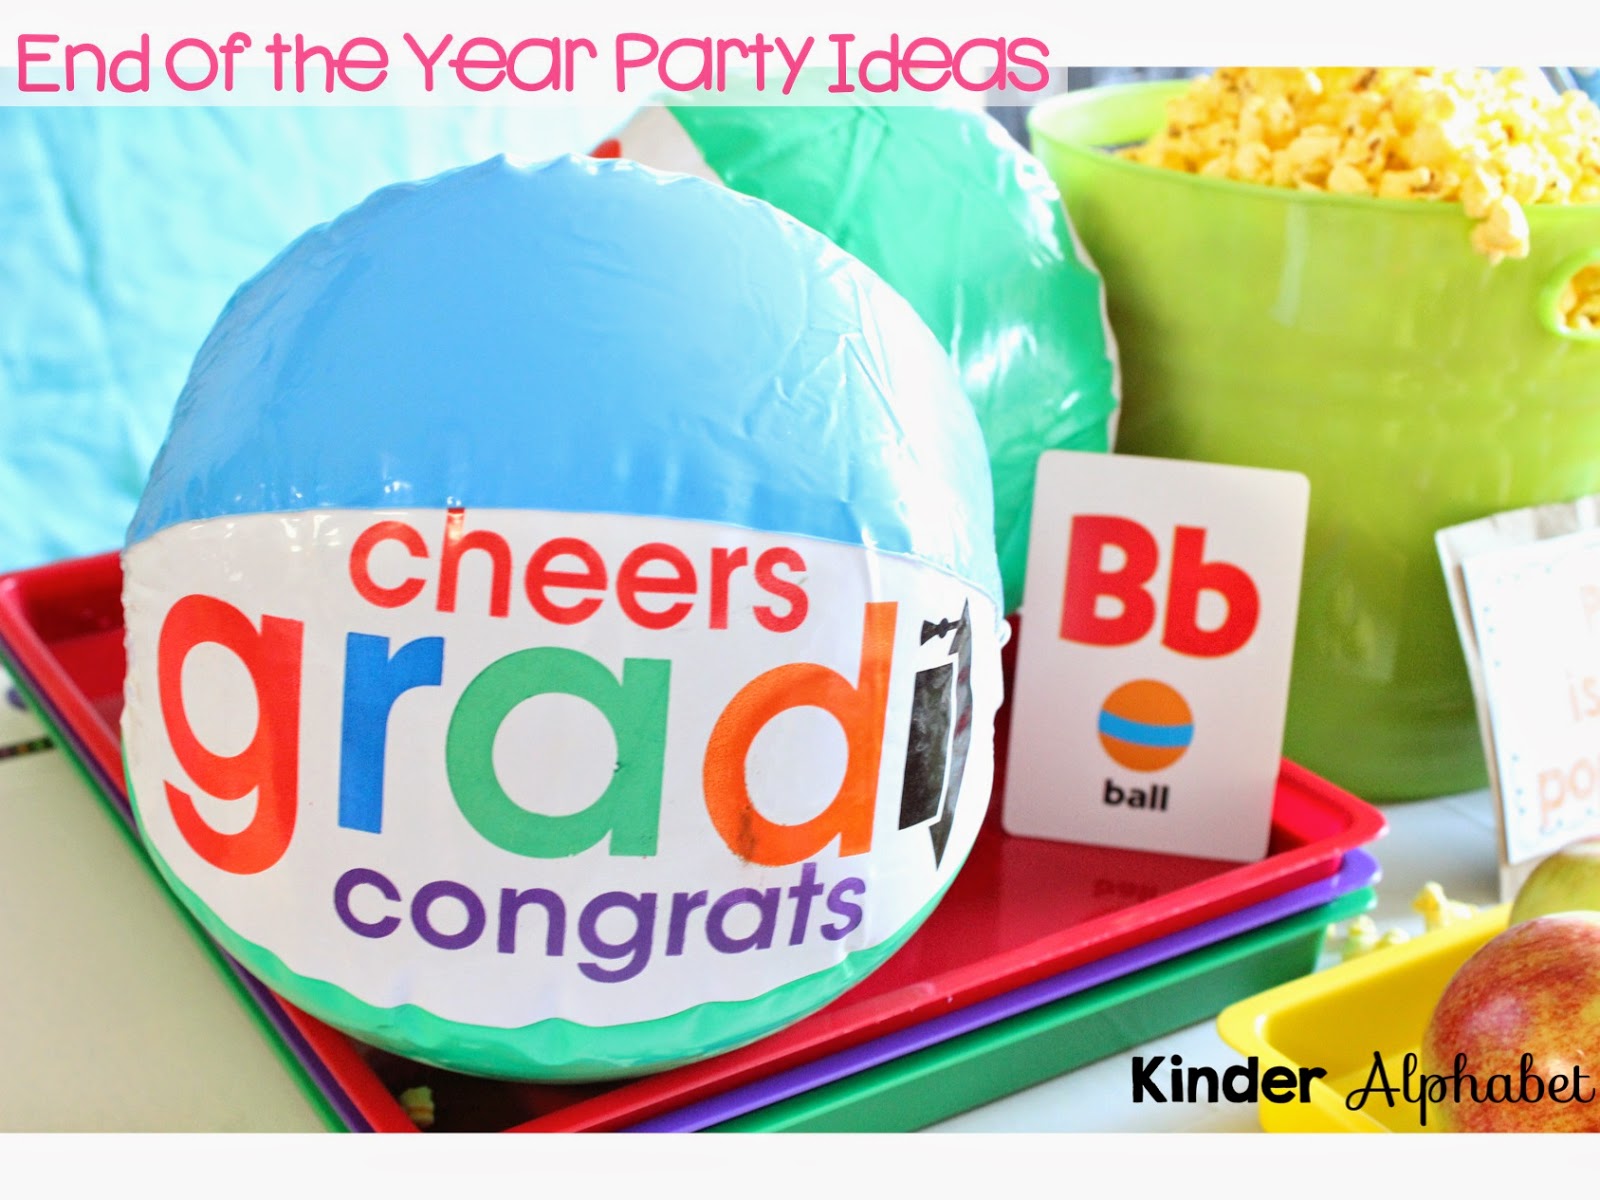 These beach balls can be used as student gifts and for decoration.